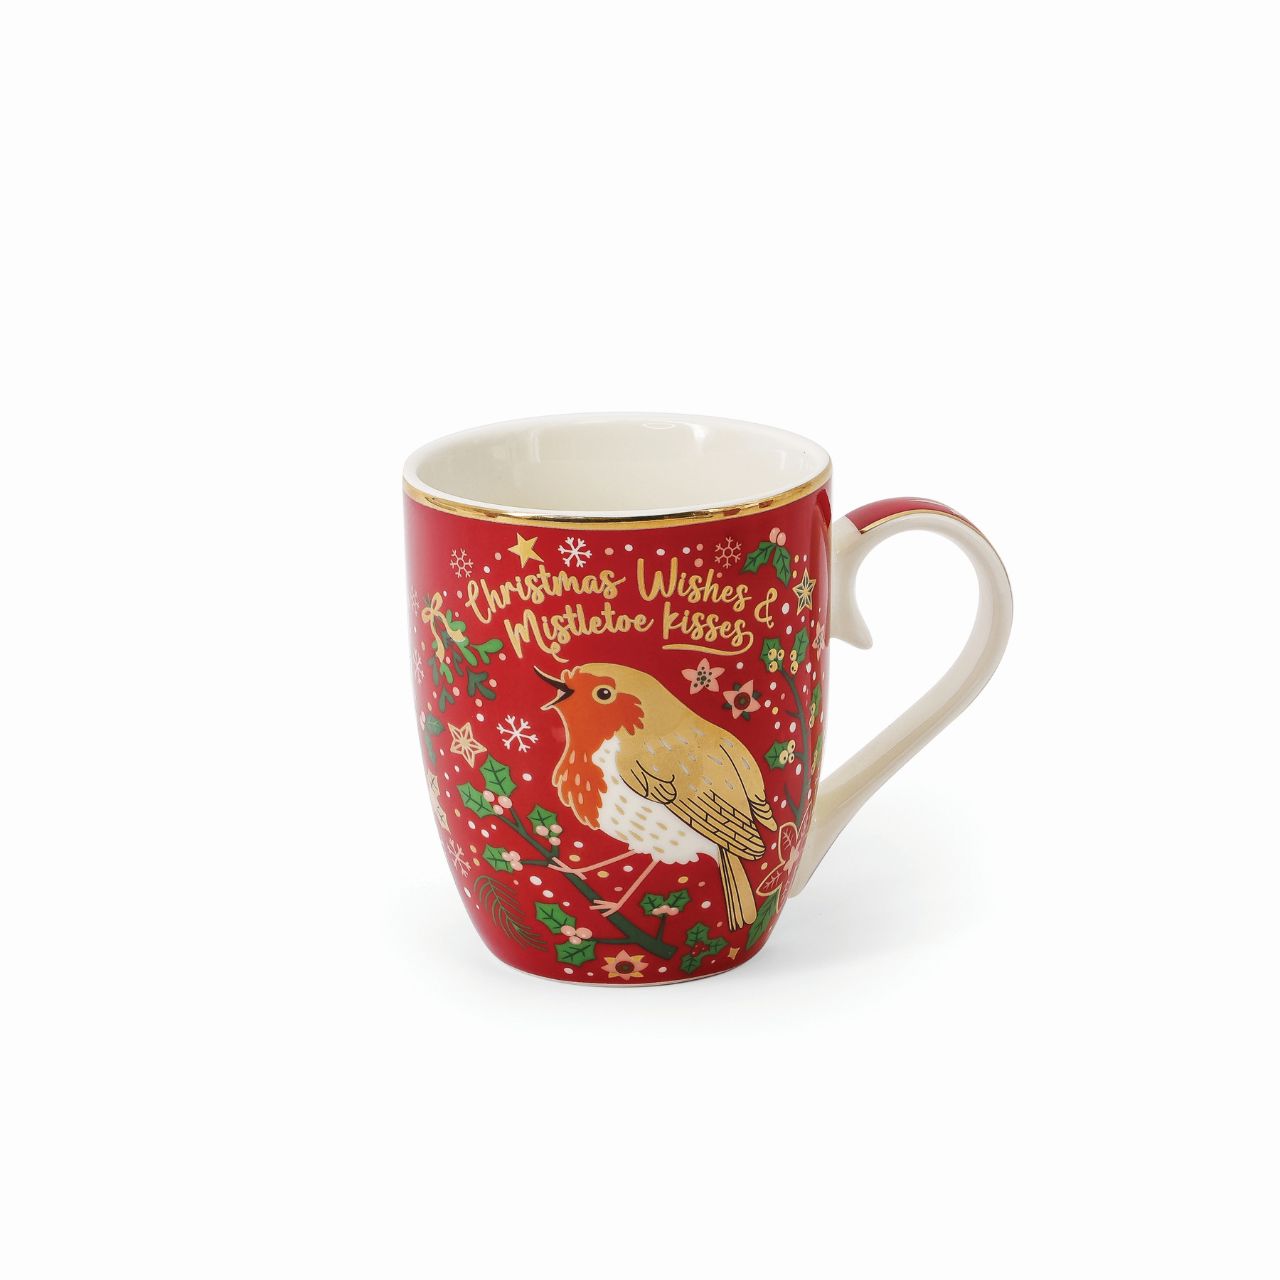 Christmas Robin Set of 4 Mugs by Tipperary  This set of four festive mugs will add seasonal cheer to your kitchen. Crafted from high-quality ceramic, each mug features a unique design of red and gold Christmas Robins. Enjoy your favourite hot beverage this holiday season with the Tipperary Christmas Robin Set of 4 Mugs.